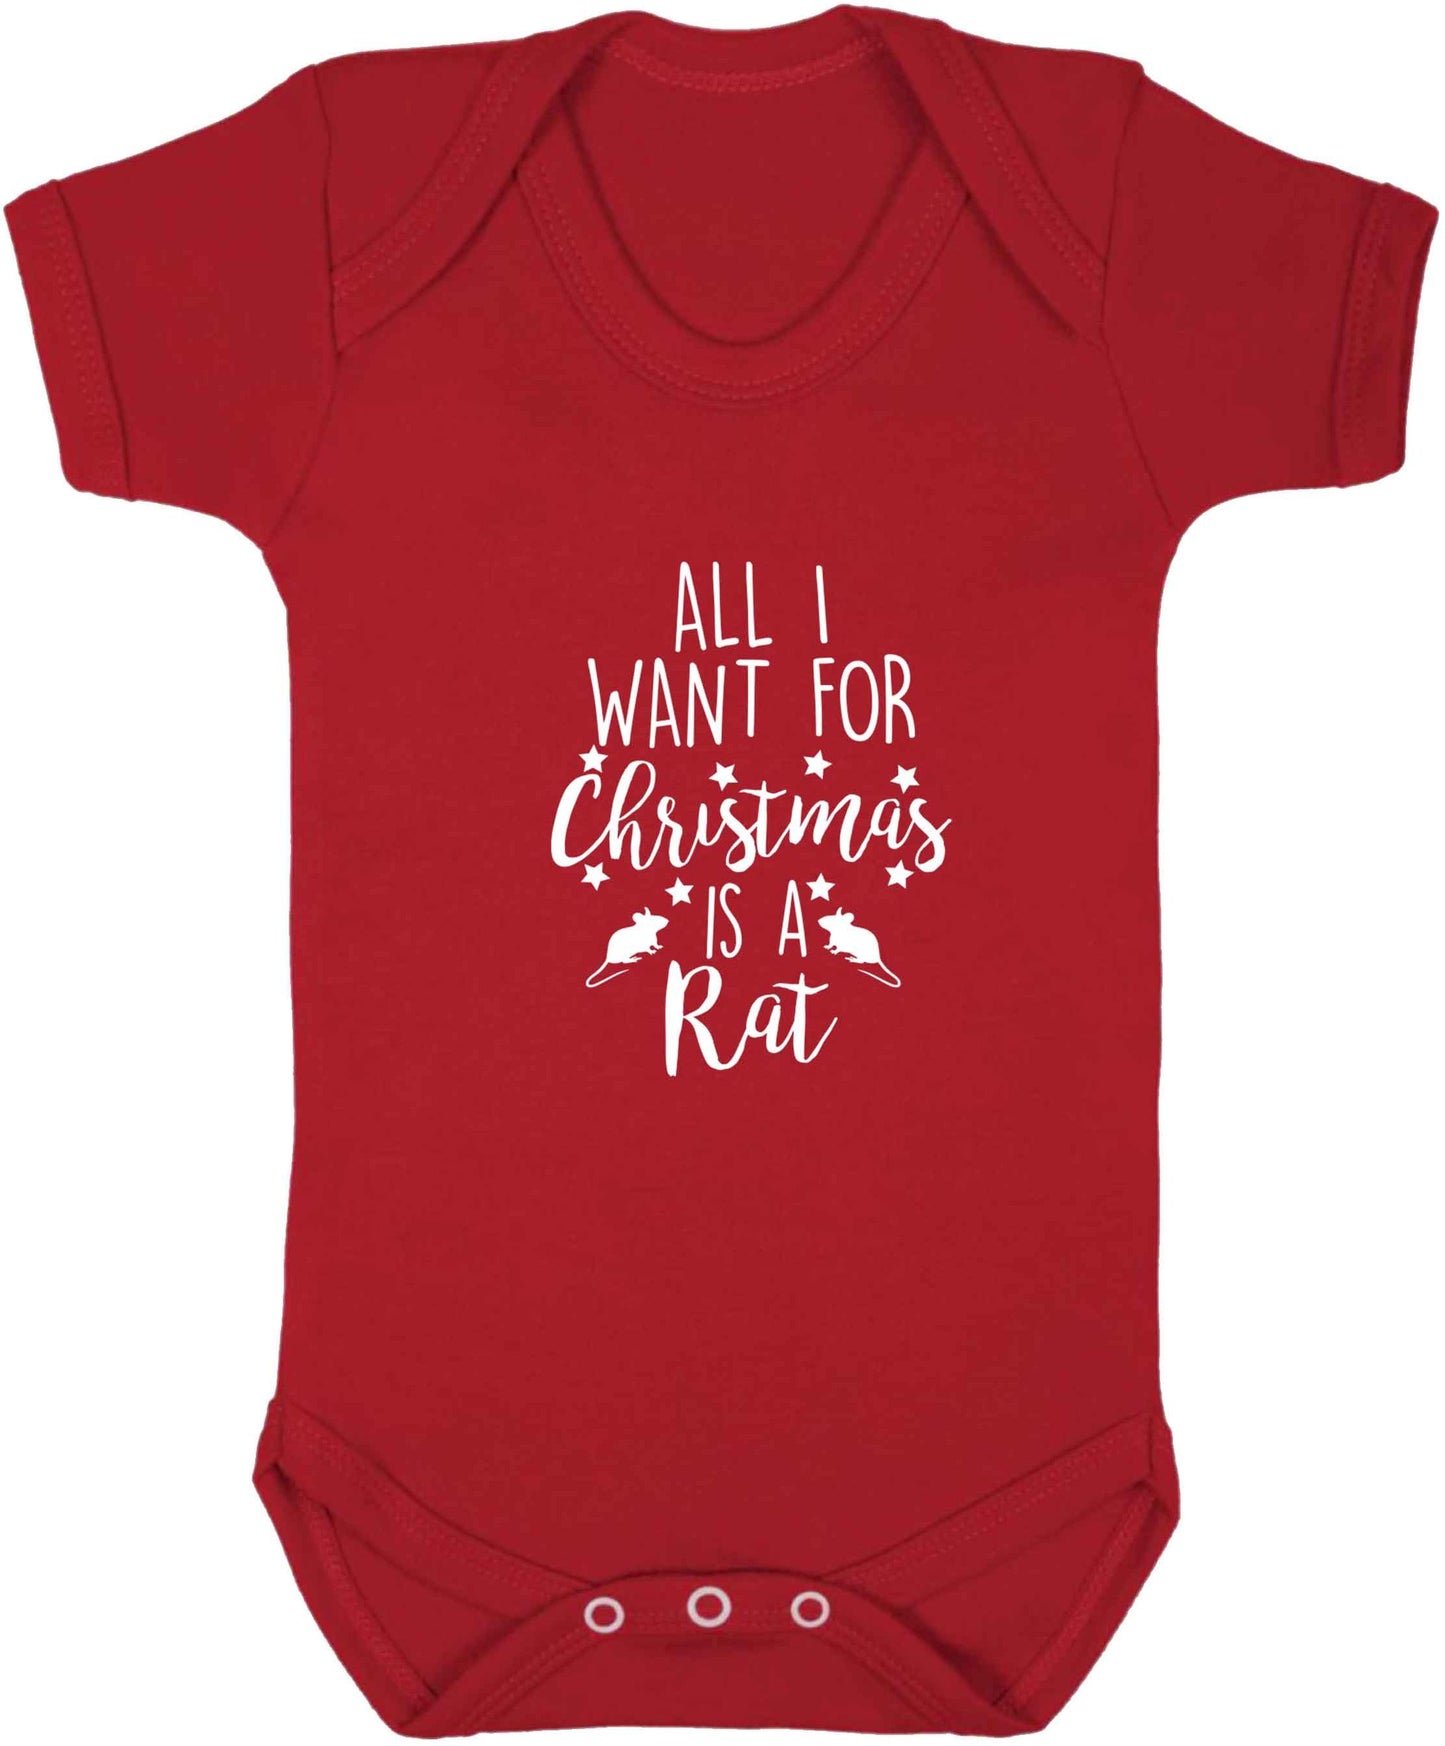 All I want for Christmas is a rat baby vest red 18-24 months